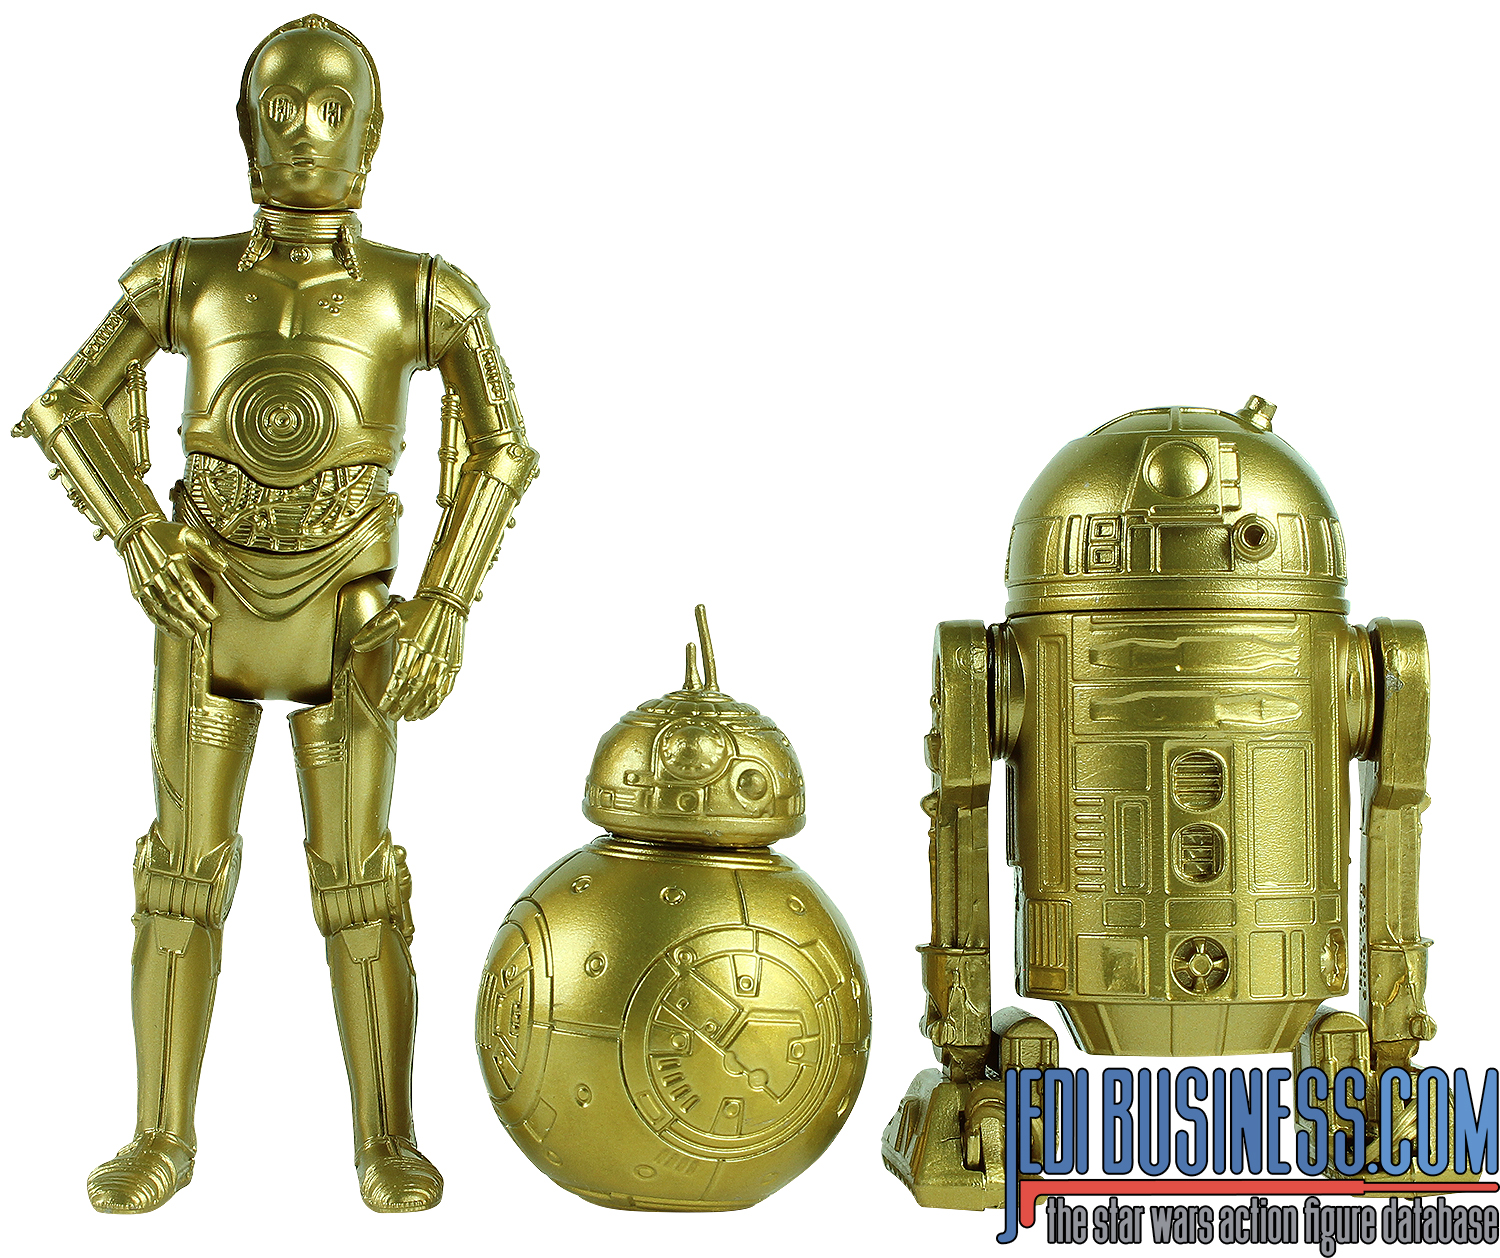 BB-8 Episode 9 - Bundled With R2-D2 And C-3PO